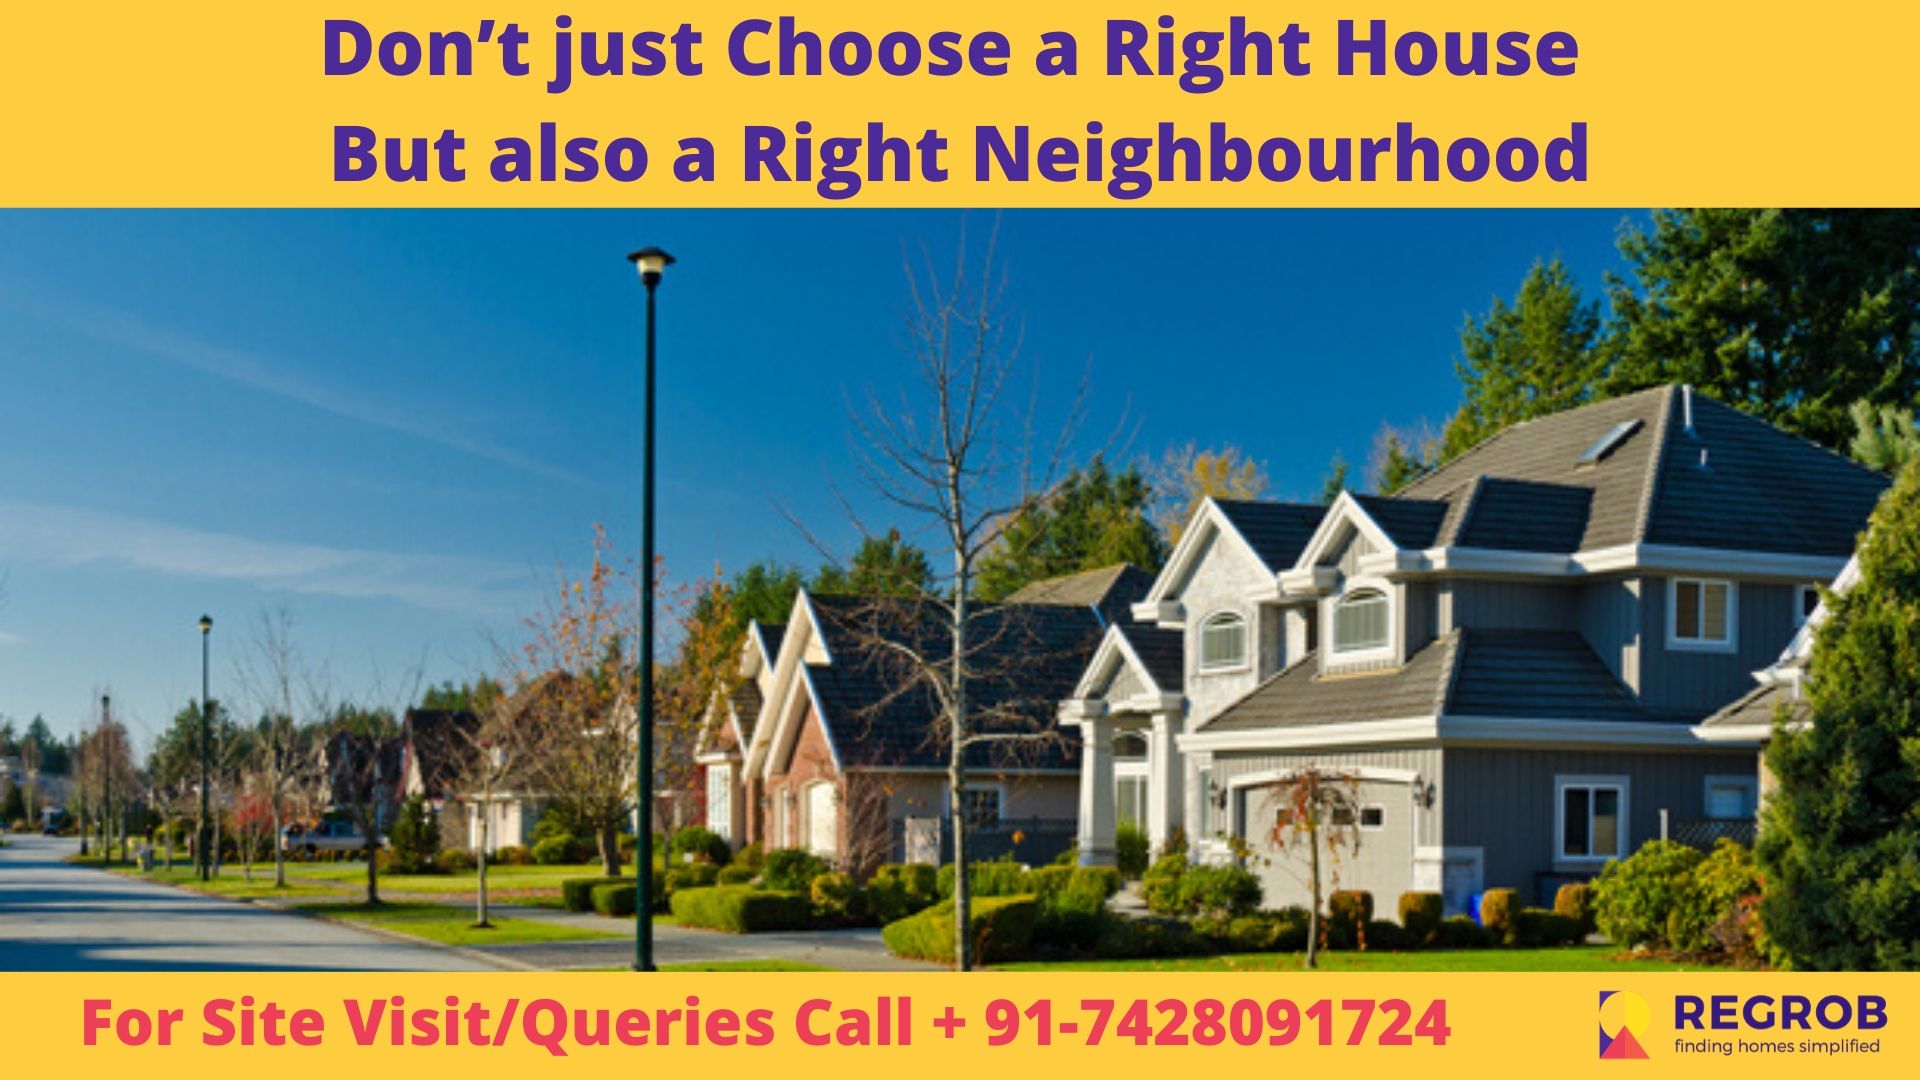 Don’t just Choose a Right House but also a Right Neighbourhood